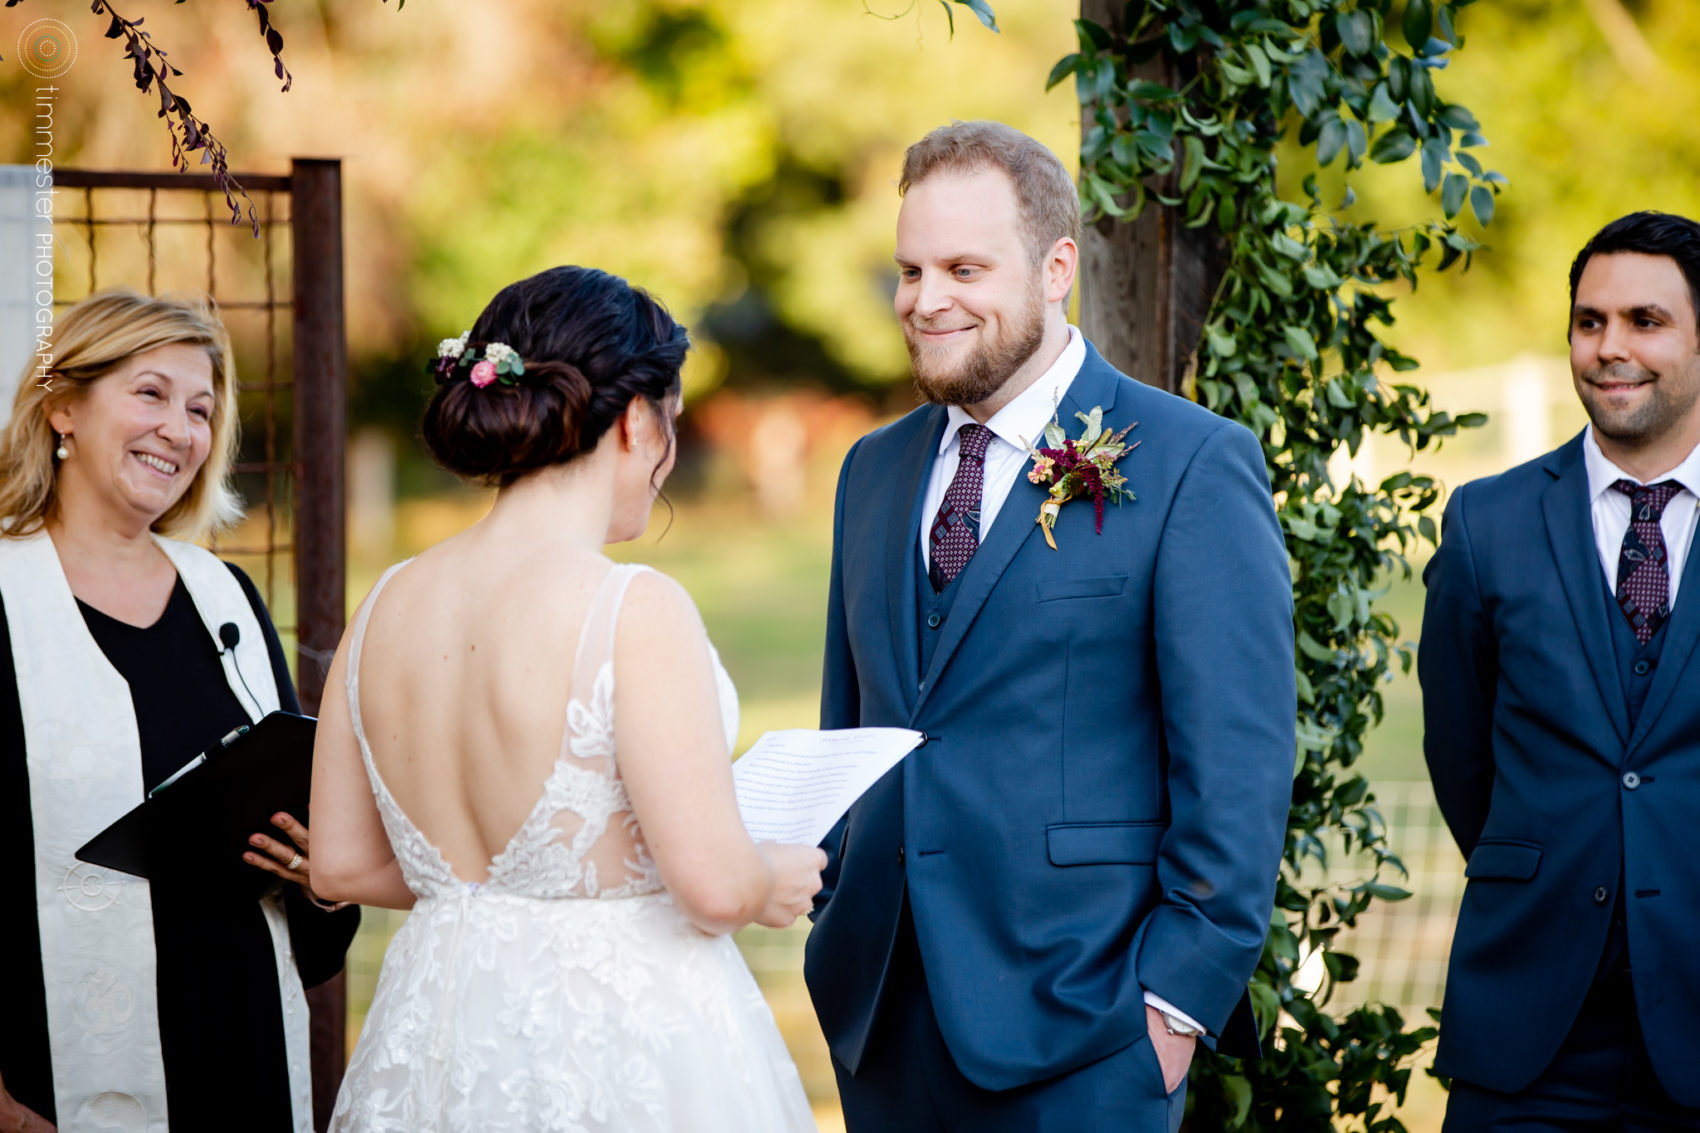 An October, outdoor wedding ceremony at Sassafras Fork Farm in Rougemont, NC